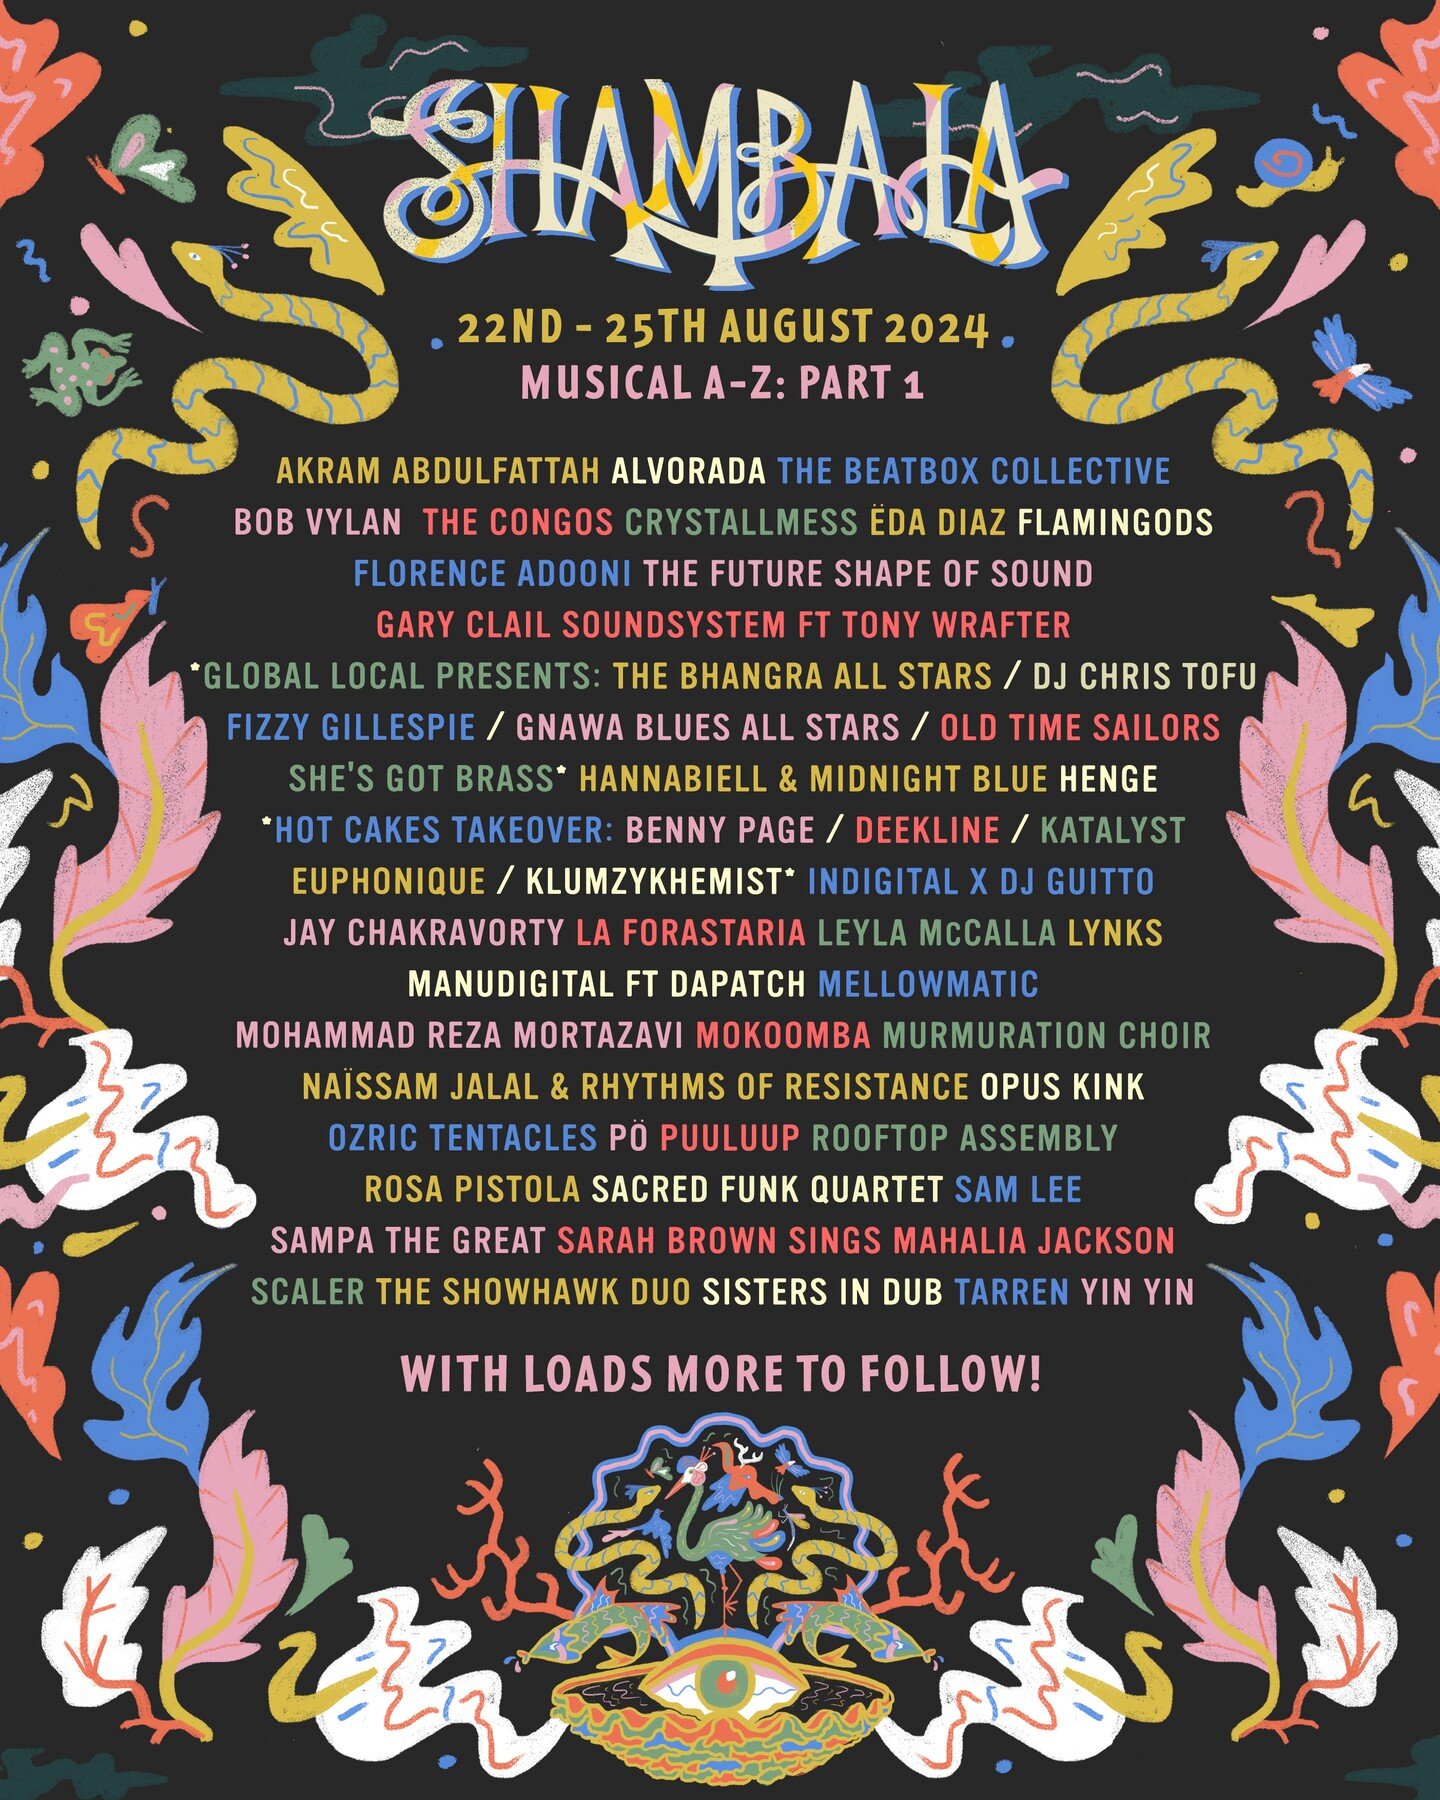 Just announced: @flamingodsmusic will be at @shambalafest this August!